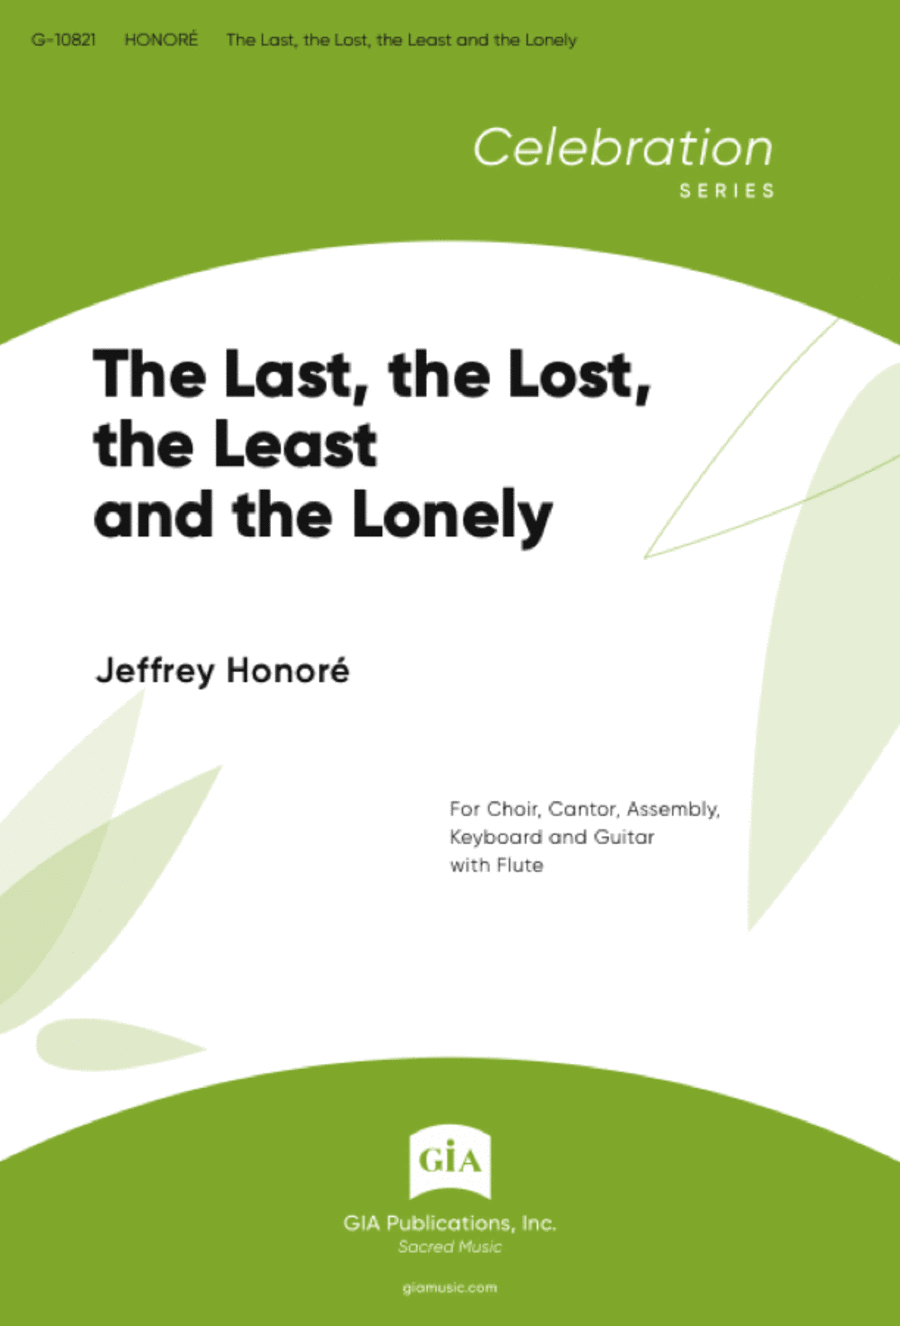 The Last, the Lost, the Least and the Lonely - Guitar edition